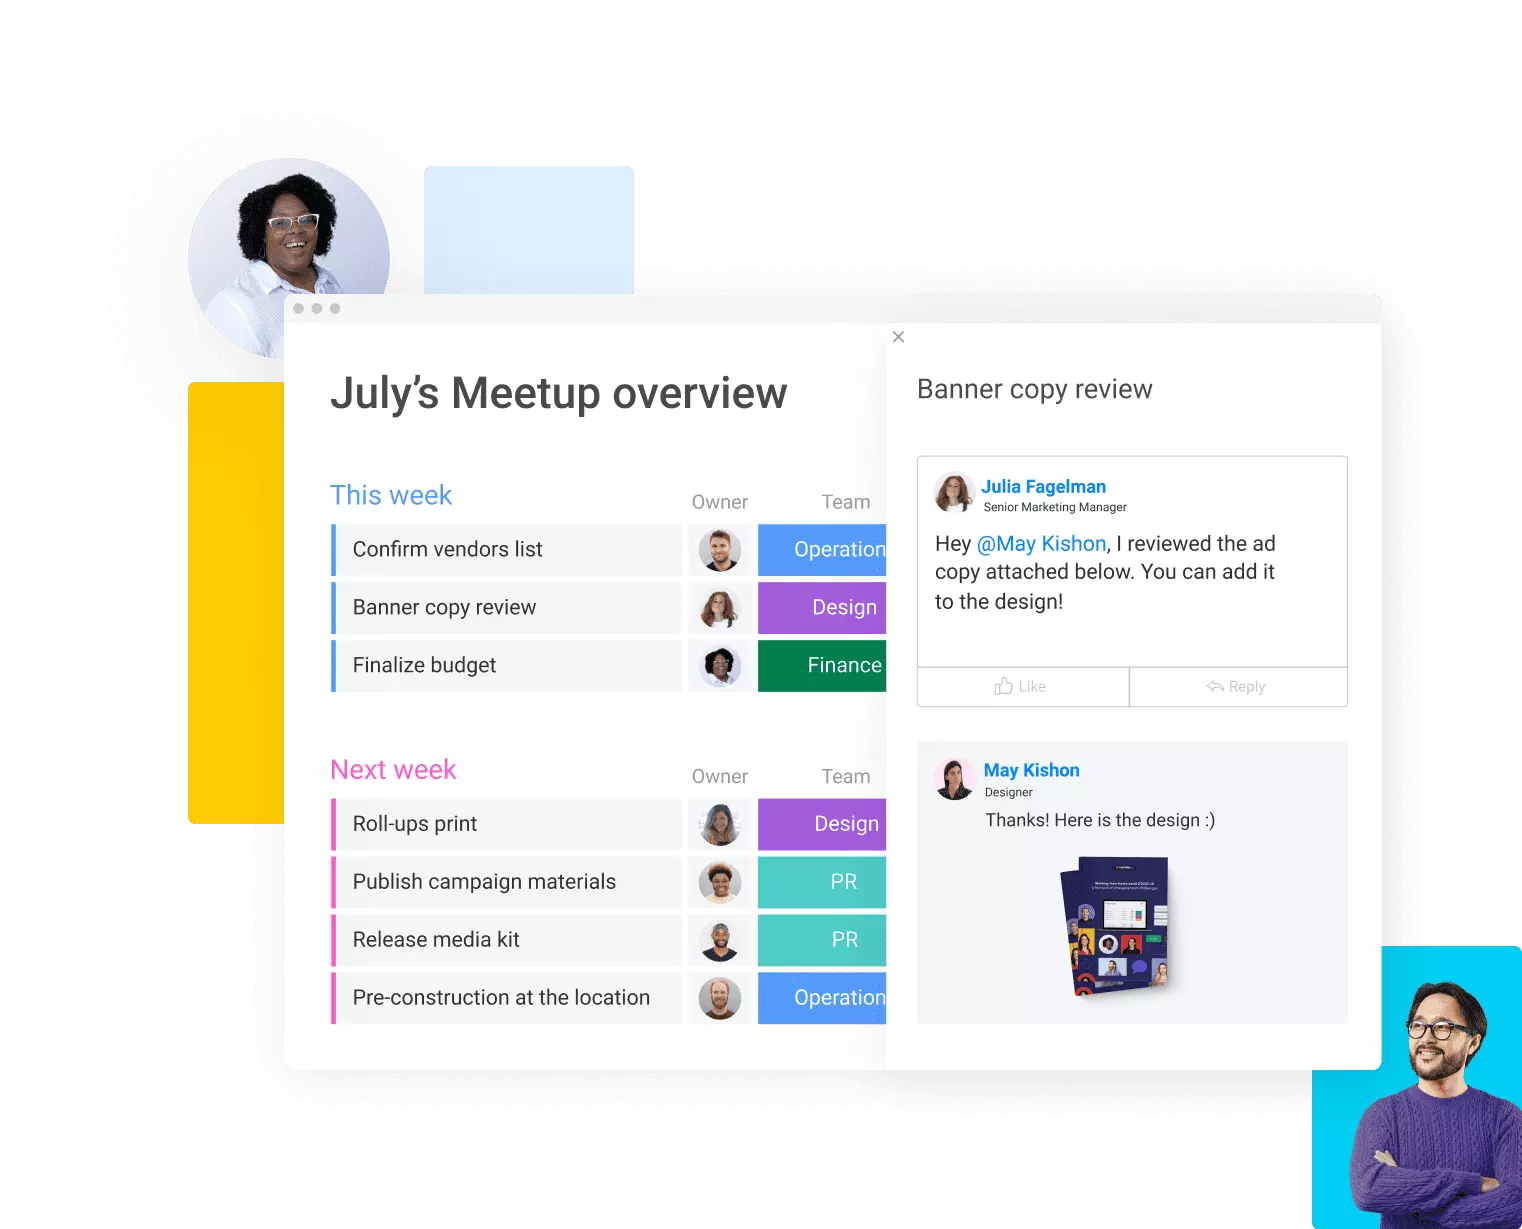 monday.com provides users with visibility of the entire event plan